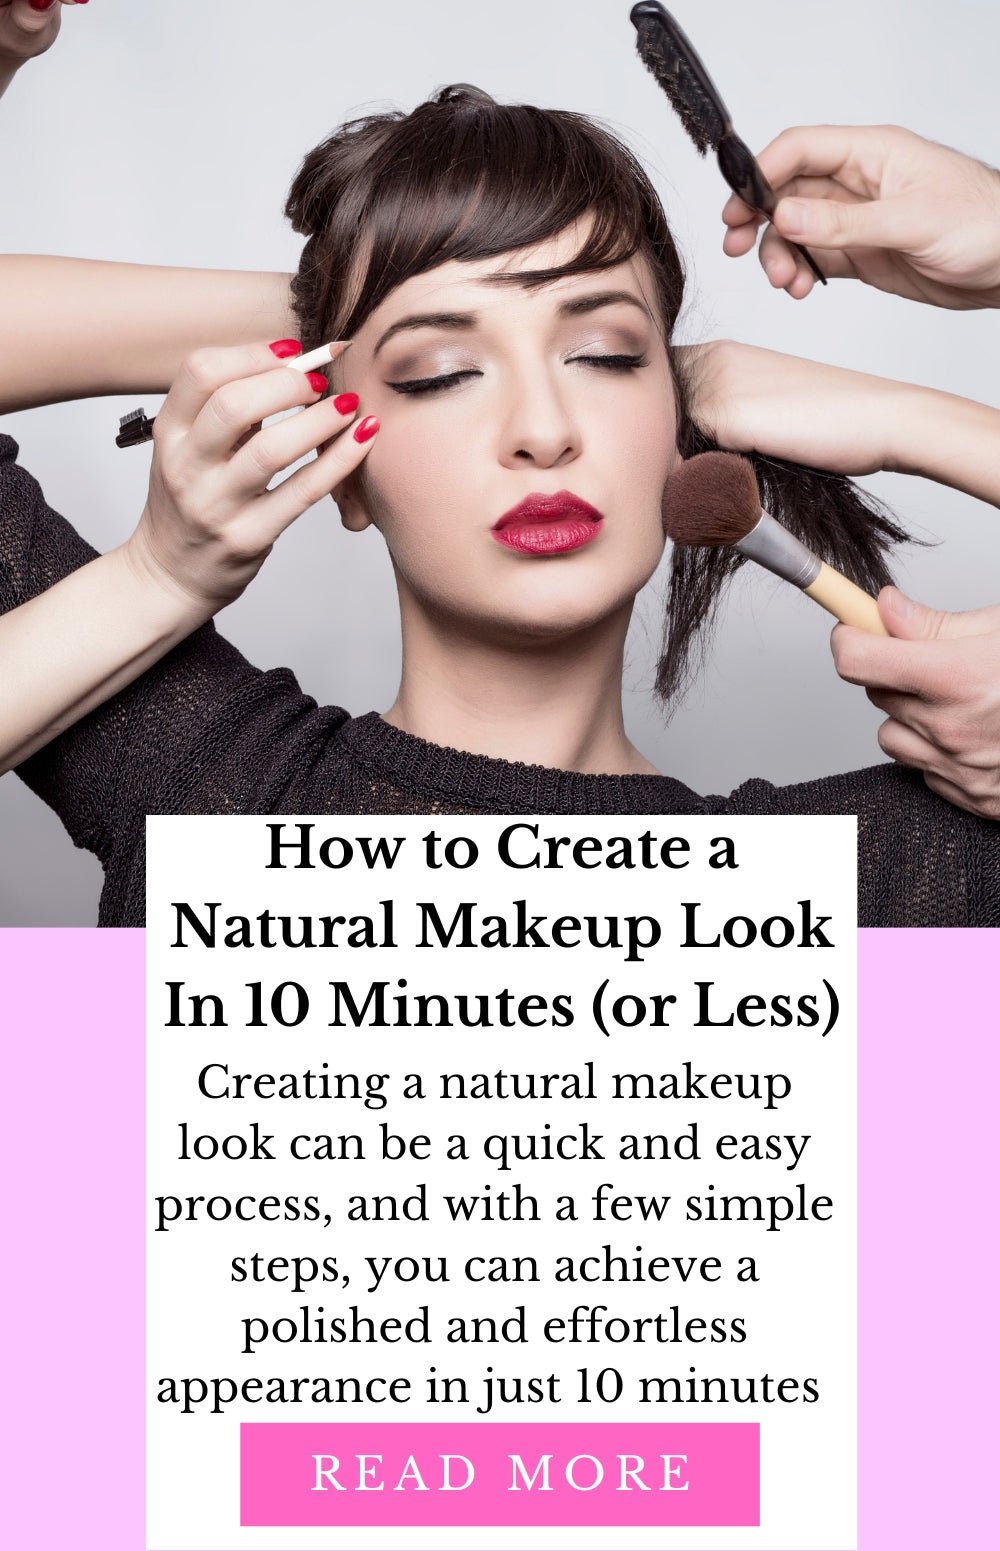 How to Create a Natural Makeup Look In 10 Minutes (or Less) - TGC Boutique